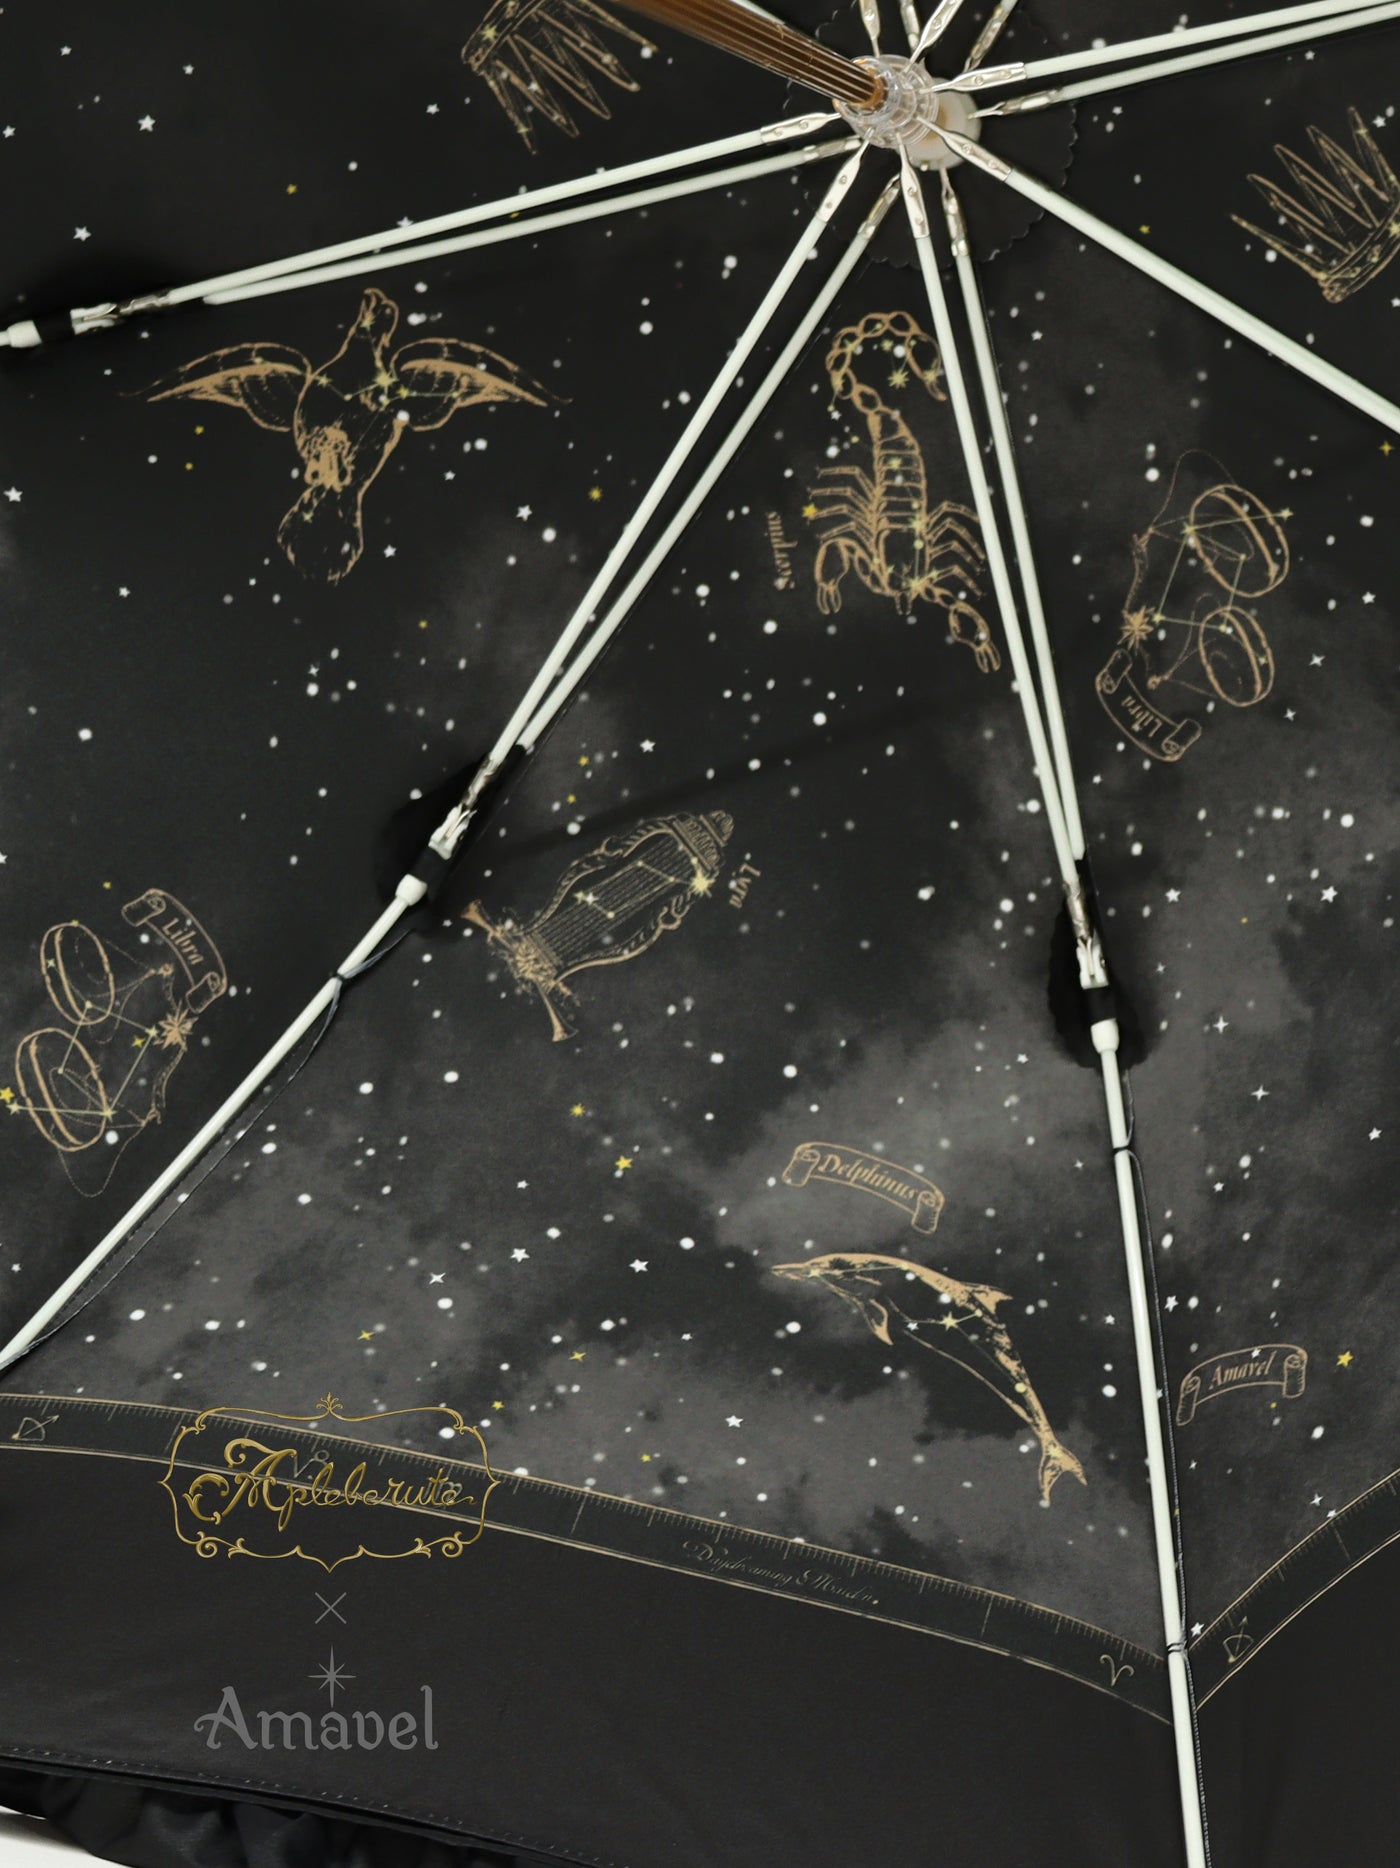 Members Only Asterism Umbrella